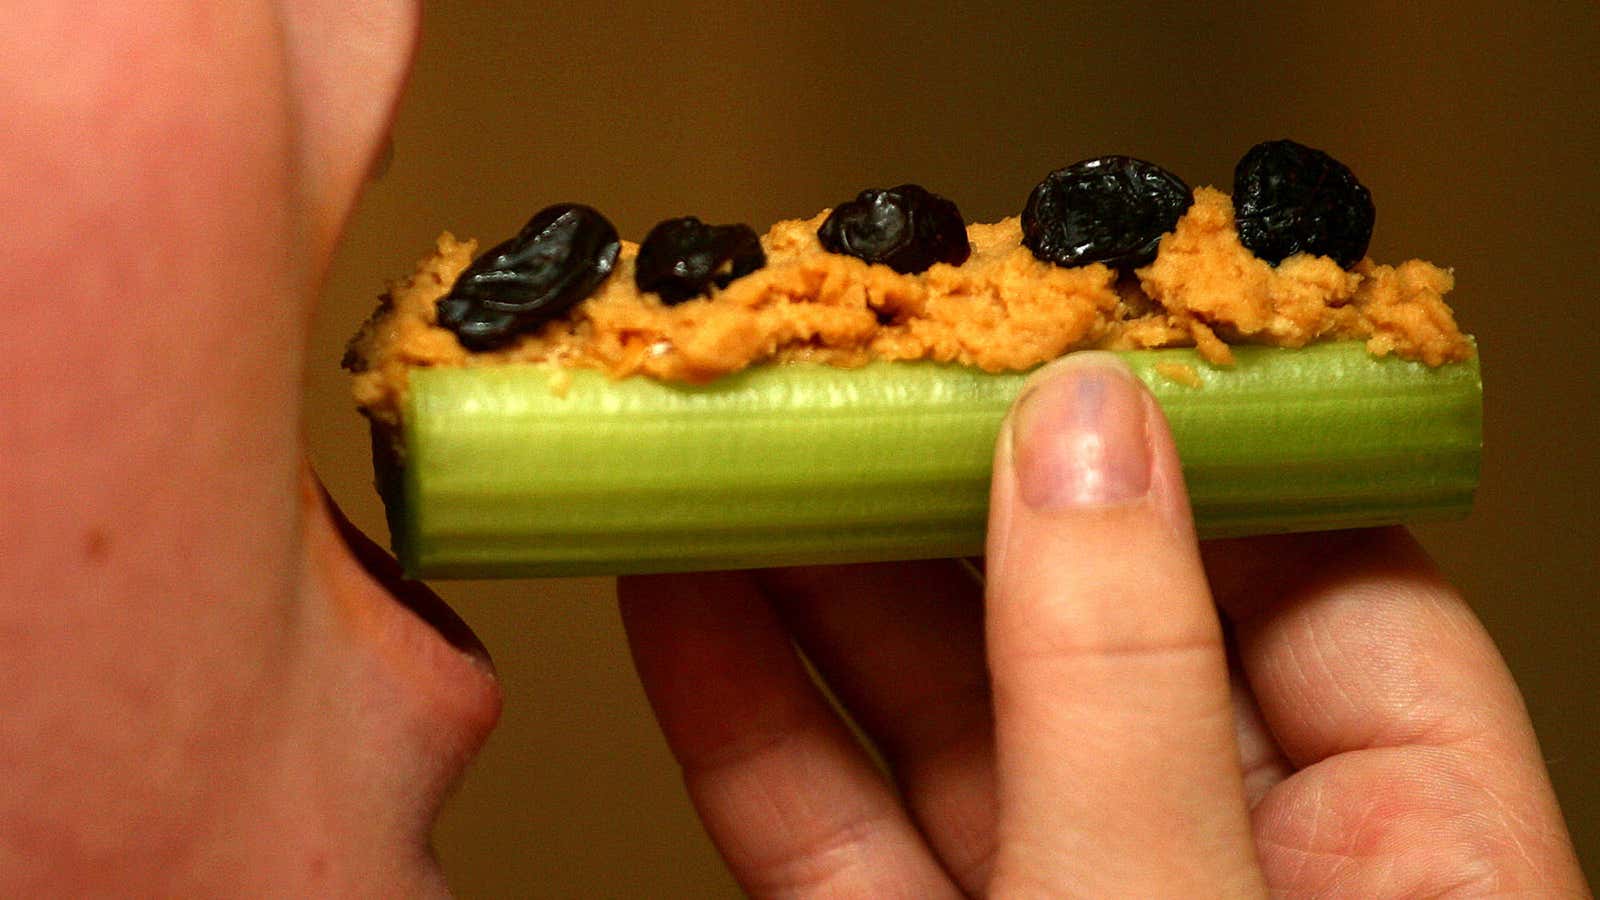 Ants on a log isn’t the first time people got creative with celery.